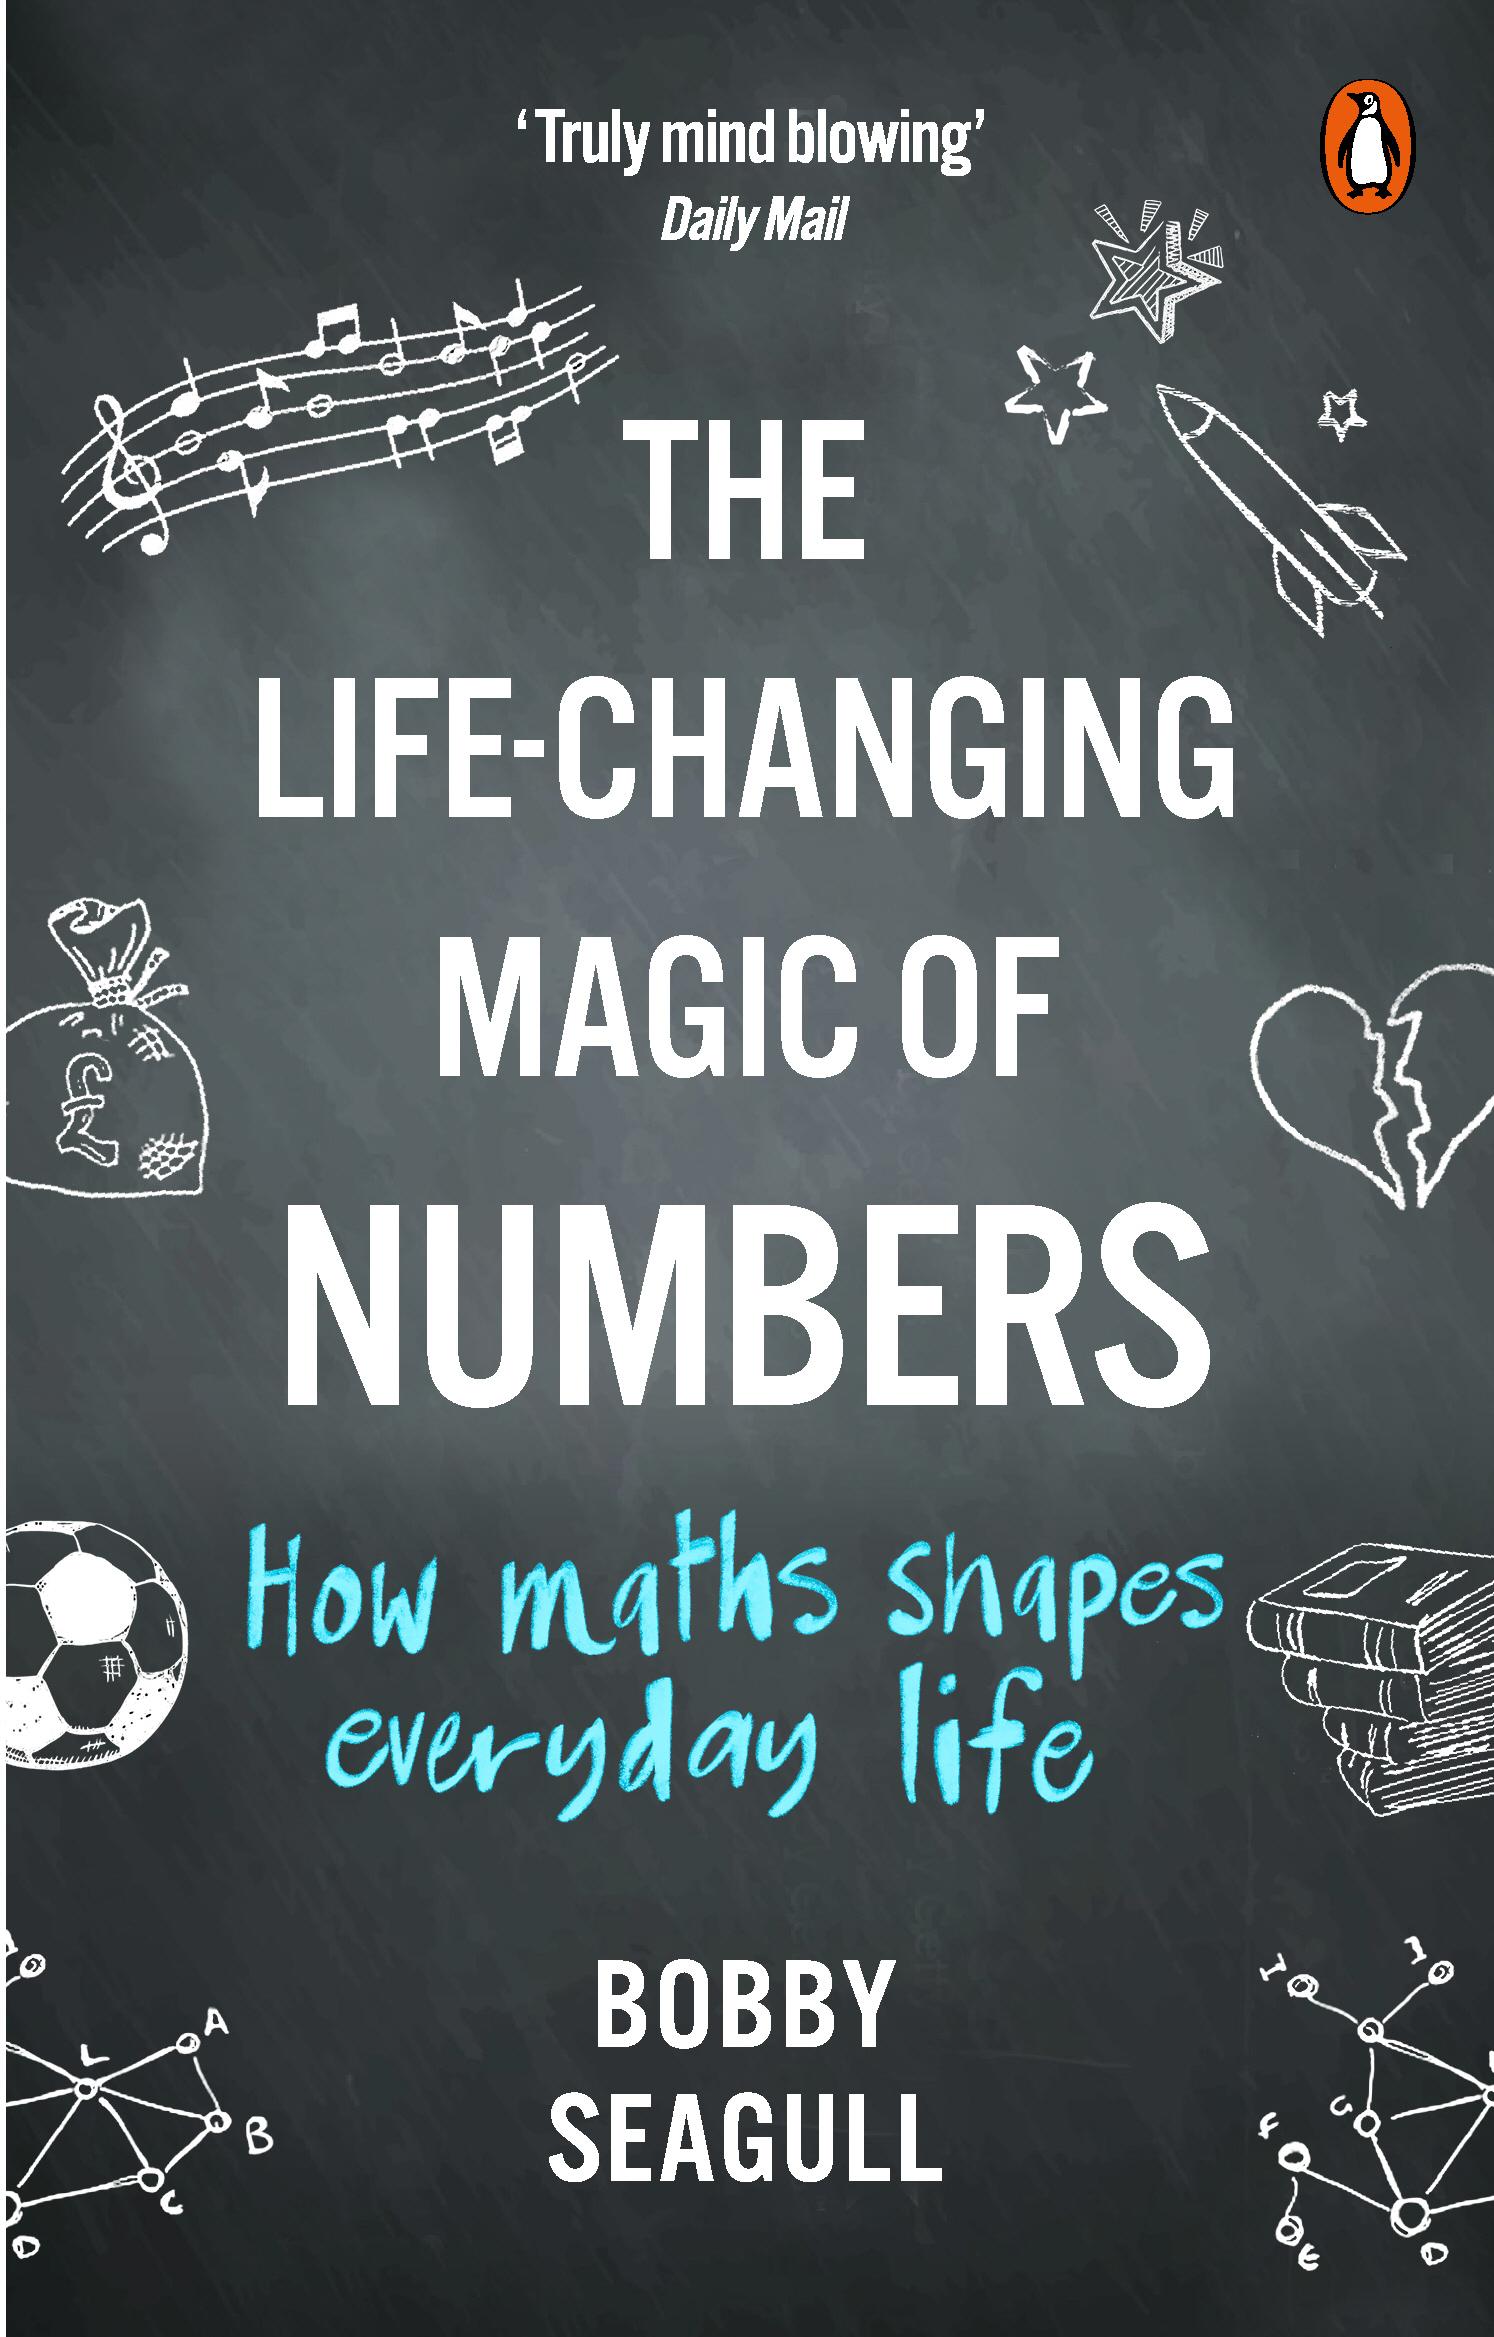 Life-Changing Magic of Numbers - Bobby Seagull